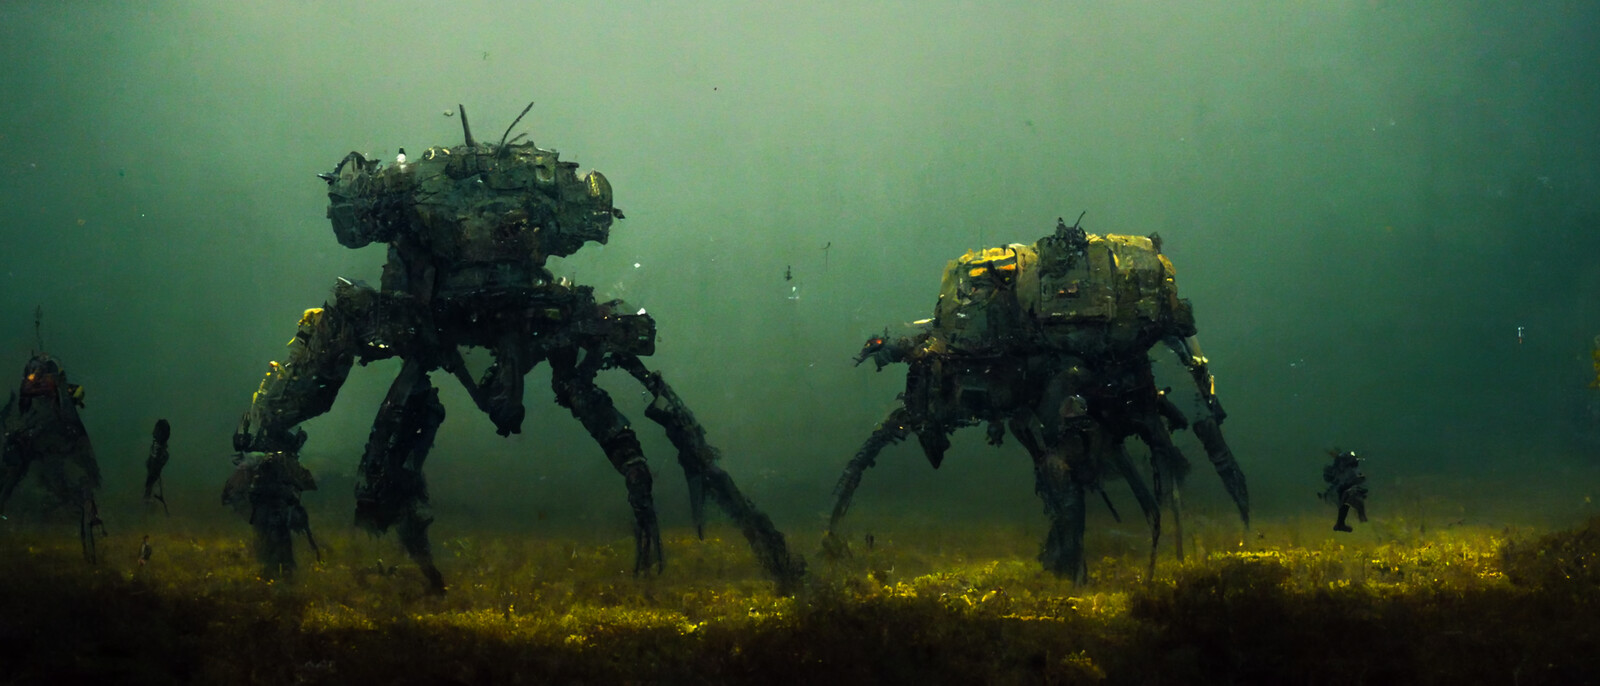 CRABS. Centurion Robotics Autonomous Benthic Scouts. 
The CRABS originally designed to sit on the ocean floor and monitor enemy fleets during the Last War. Repurposed as autonomous research machines. They discovered the Dark Reef. 